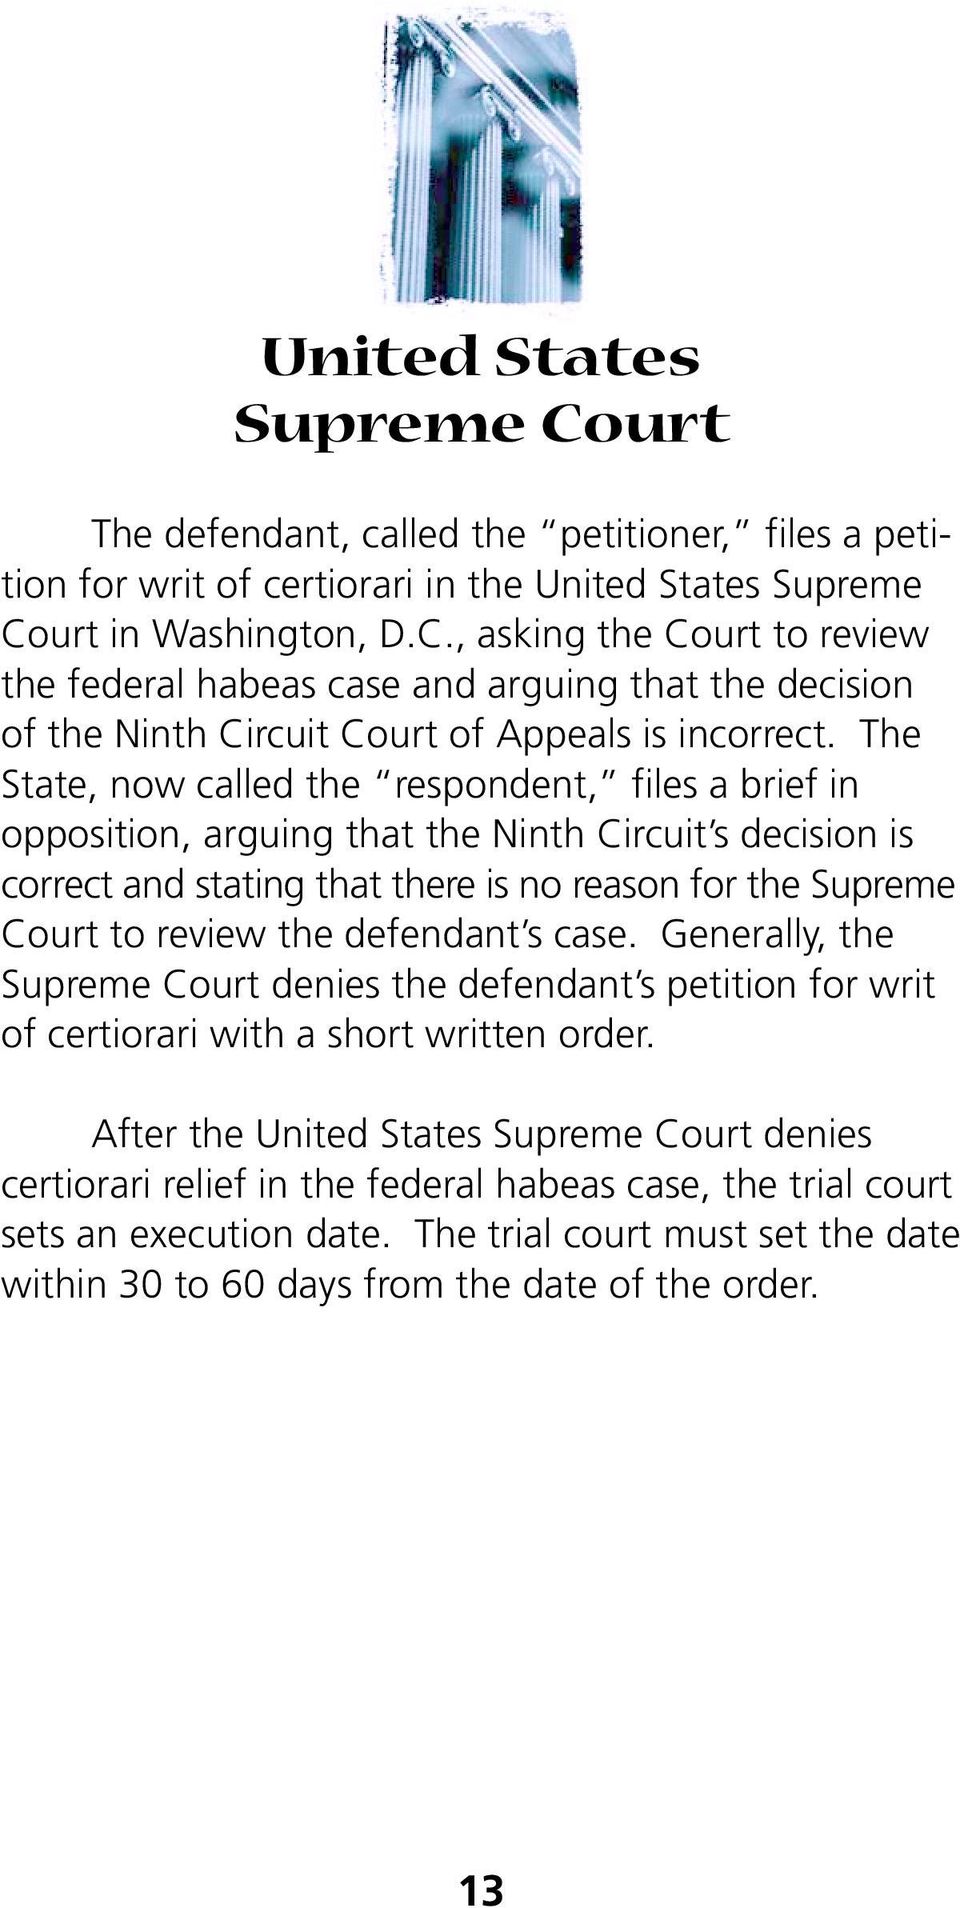 defendant s case. Generally, the Supreme Court denies the defendant s petition for writ of certiorari with a short written order.